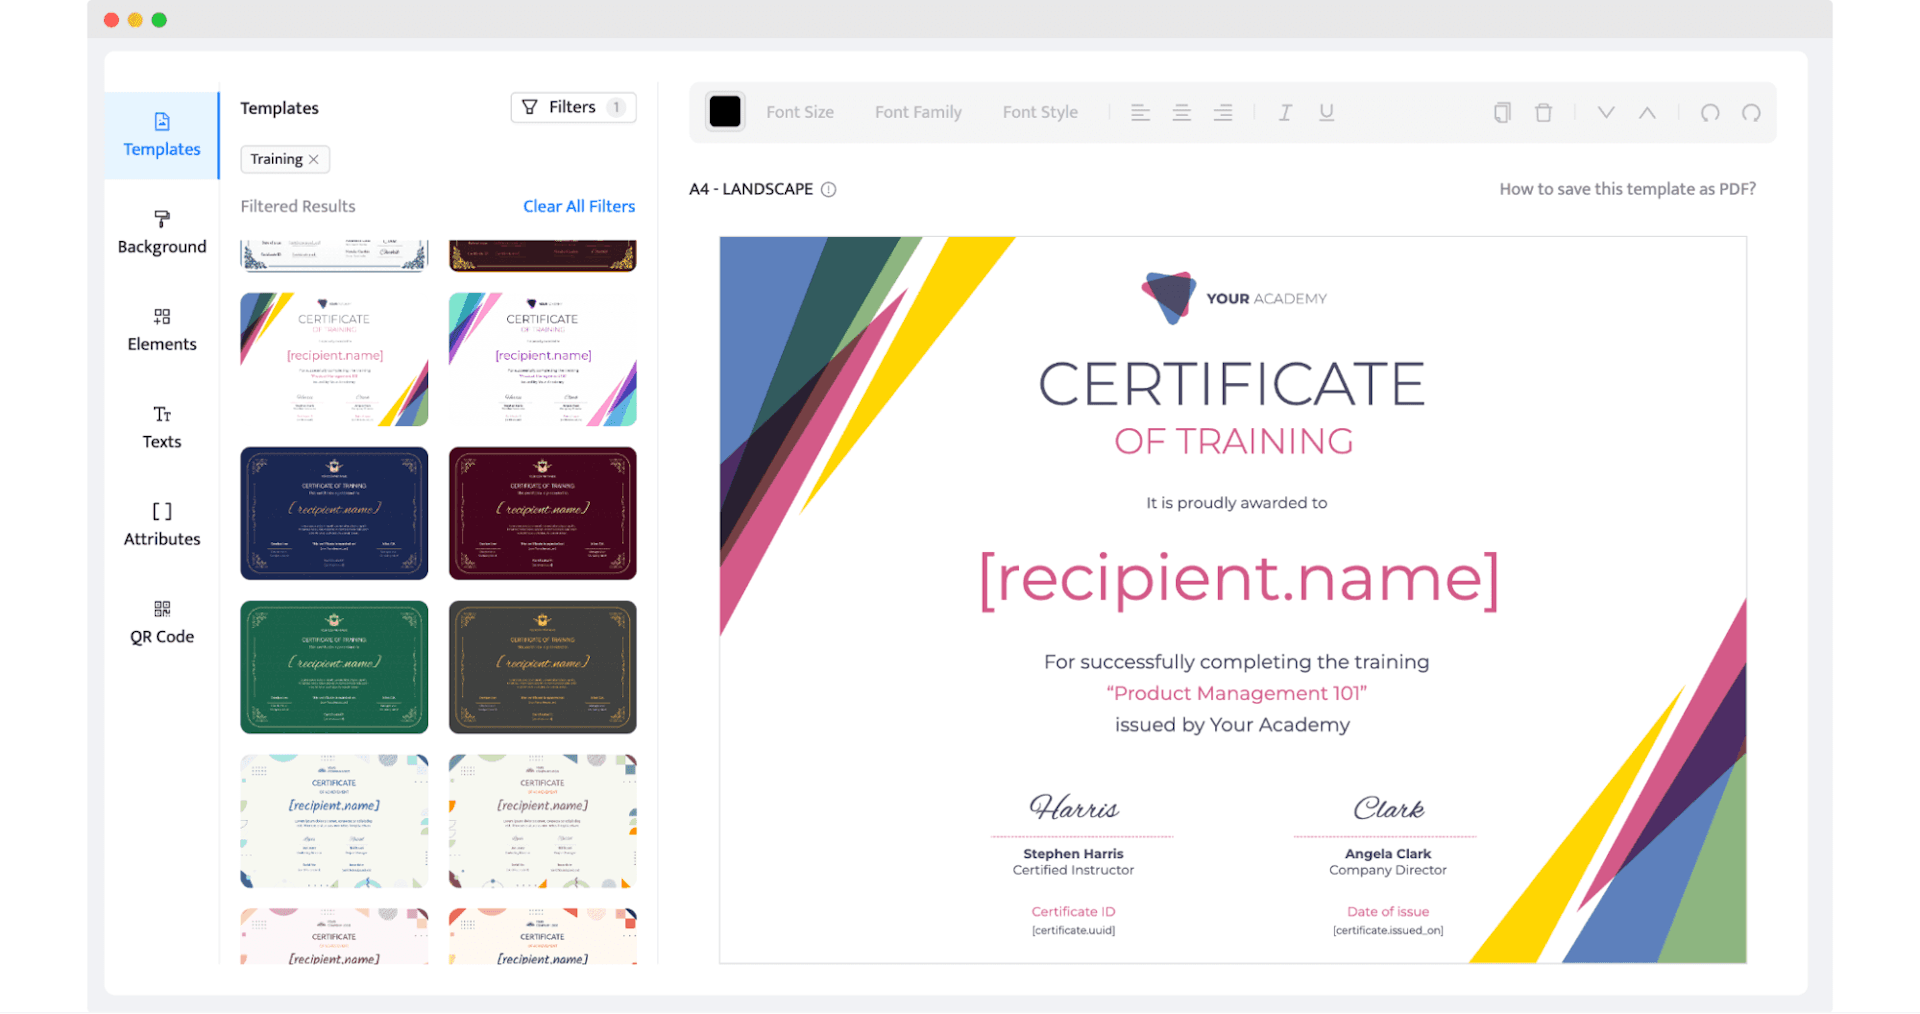 The example of designing a certificate template within the Certifier dashboard.